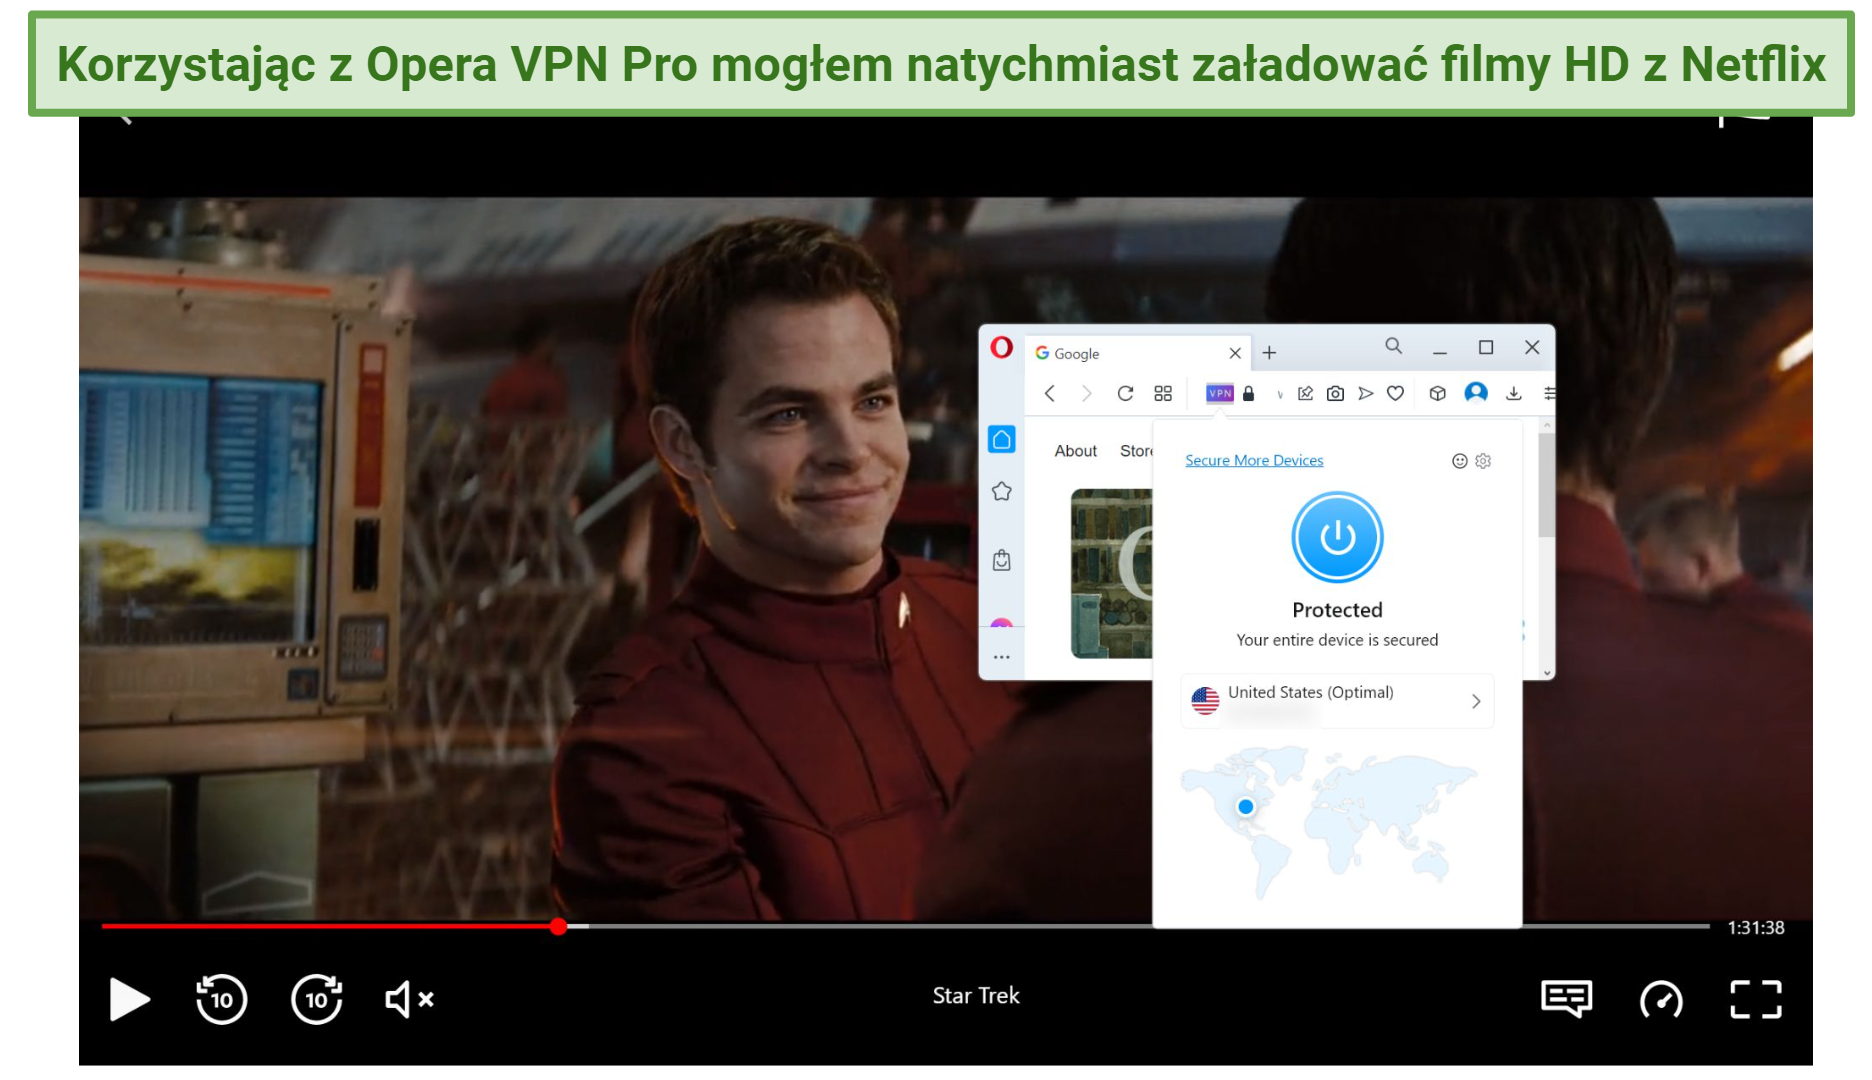 Screenshot of Netflix player streaming Star Trek while connected to OperaVPN Pro